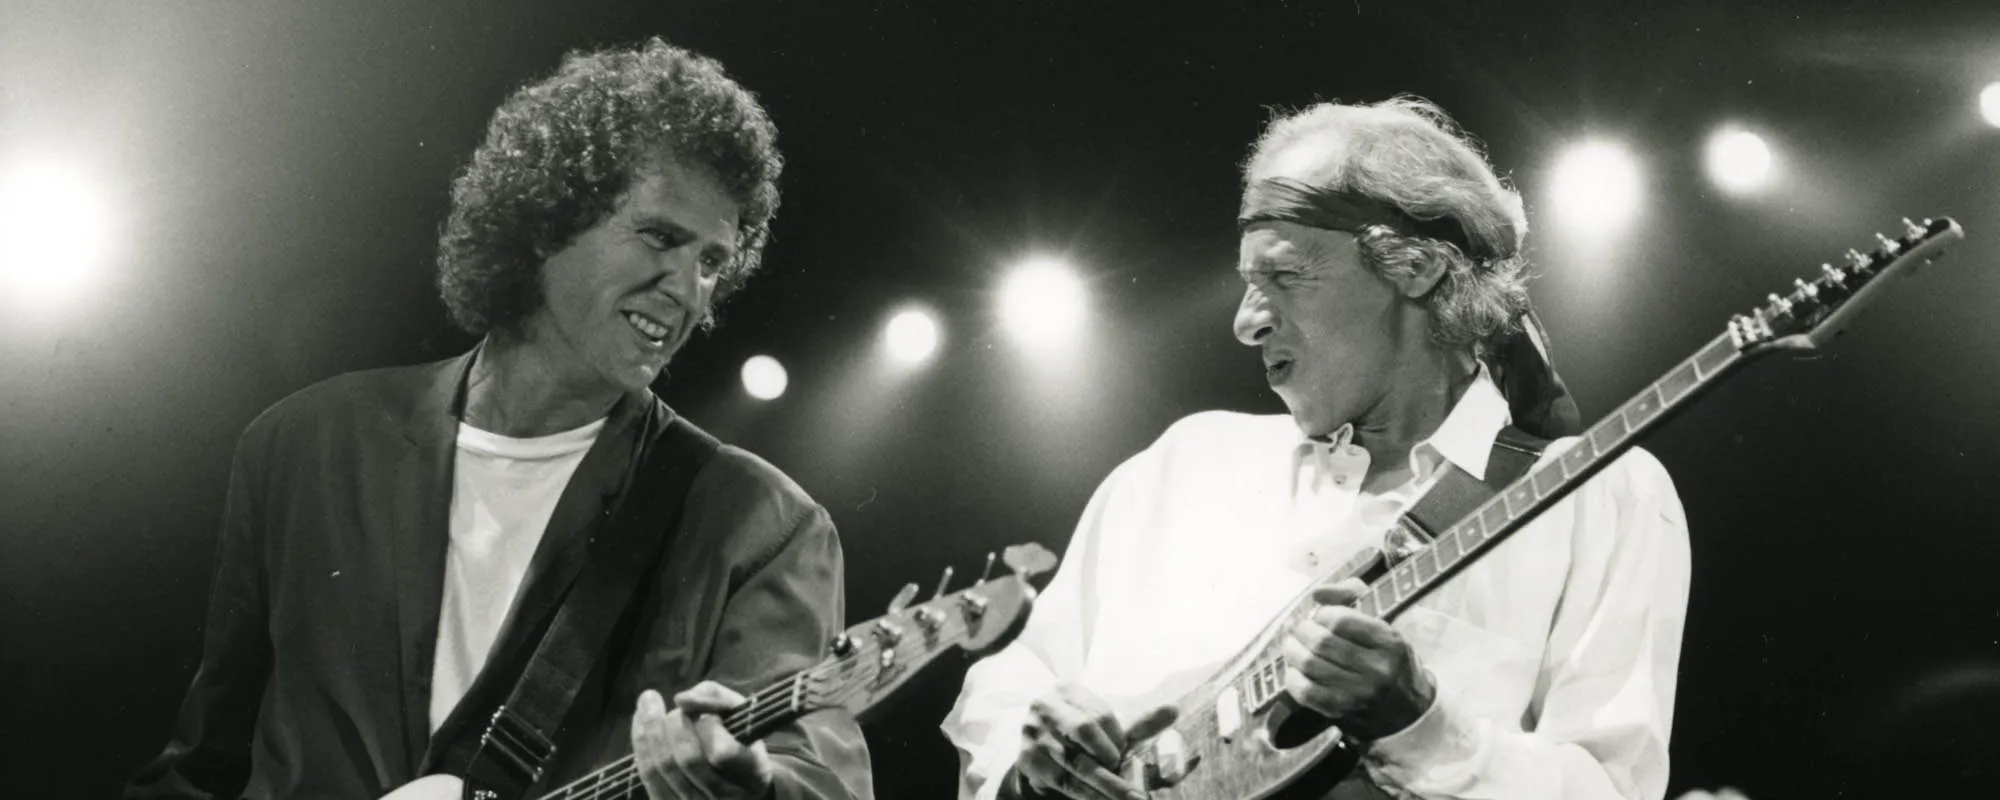 The Un-Kingly Meaning Behind Dire Straits’ Classic “Sultans of Swing”